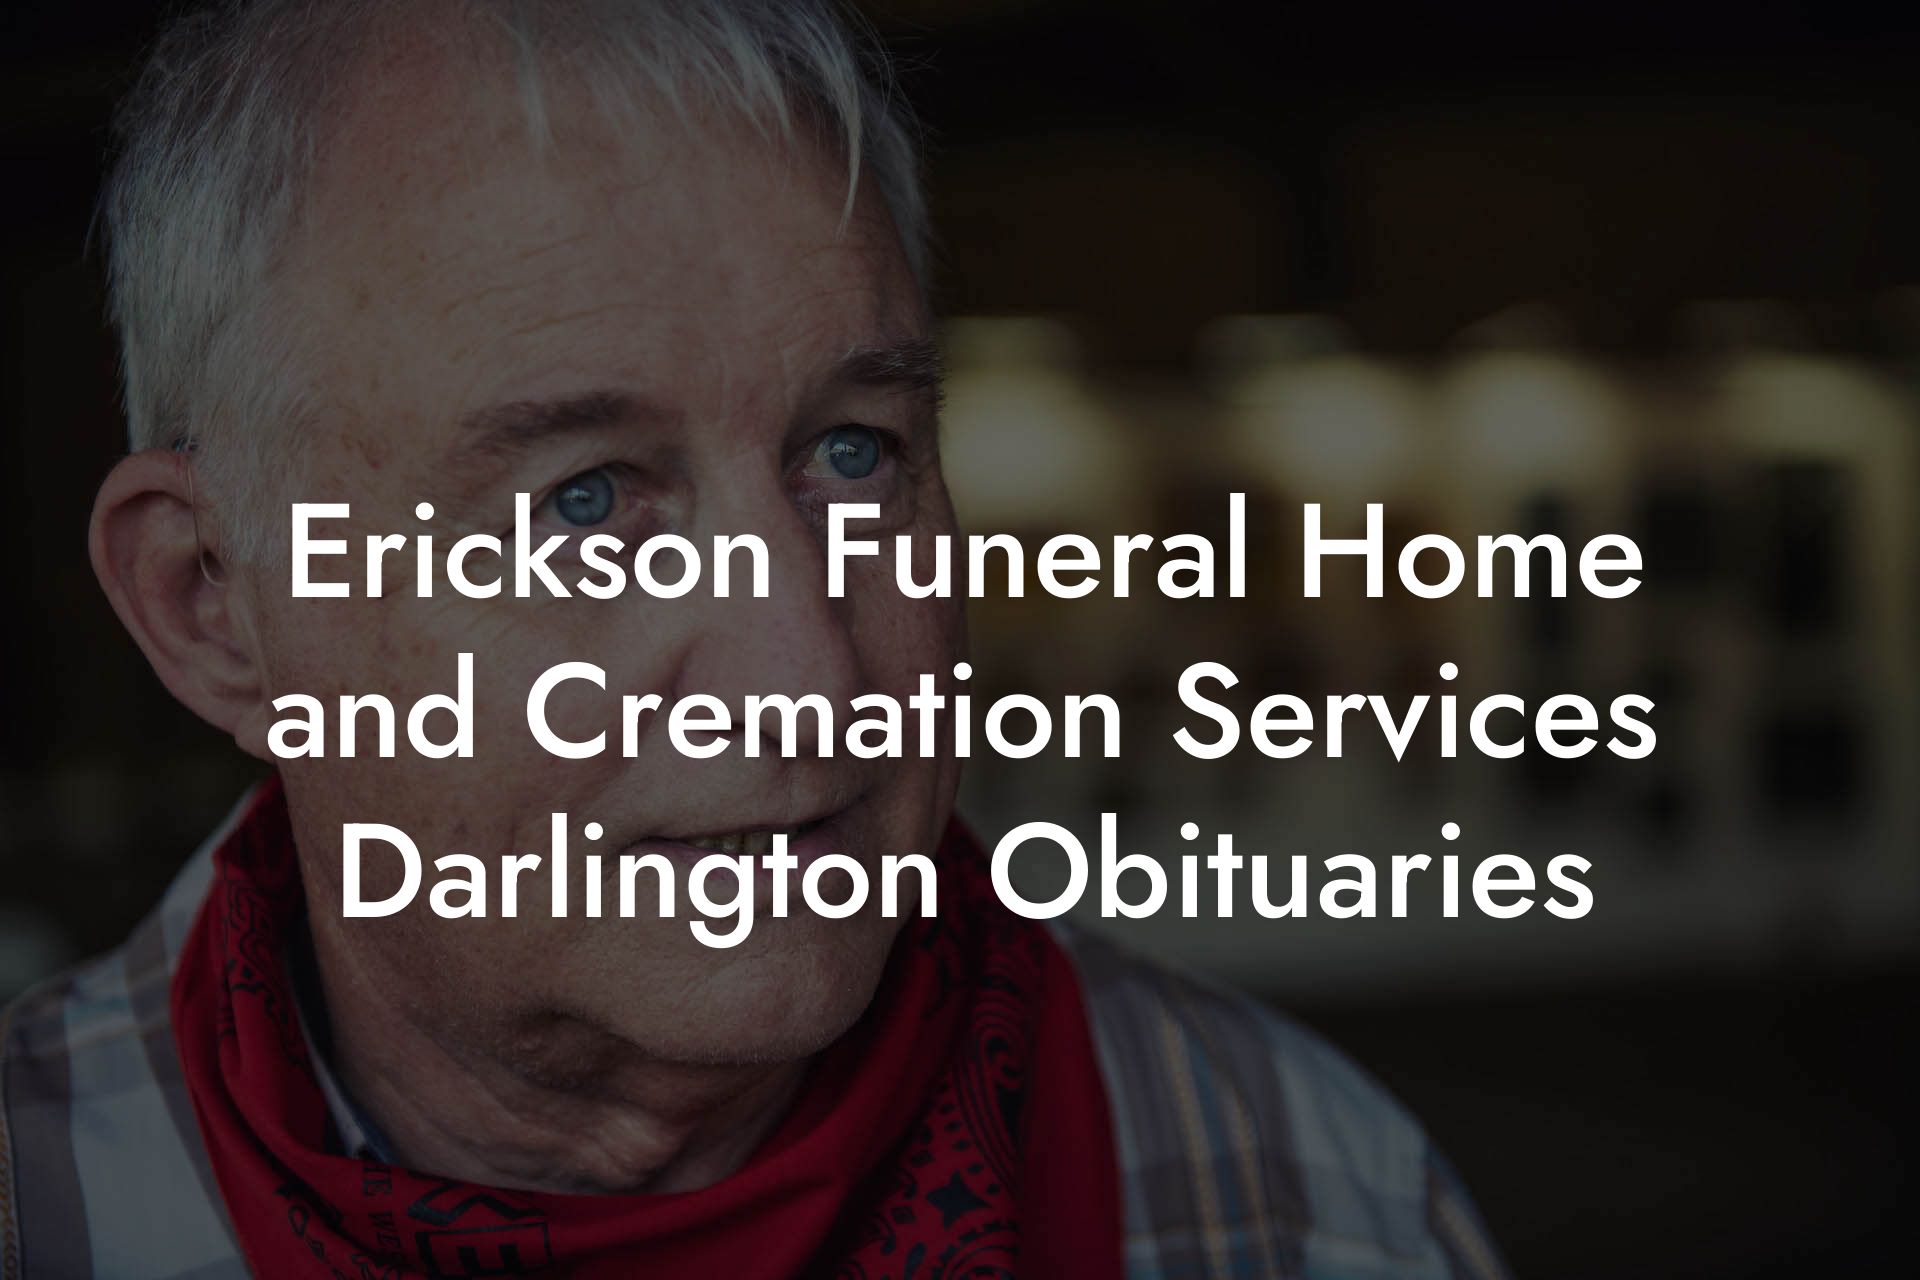 Erickson Funeral Home and Cremation Services Darlington Obituaries